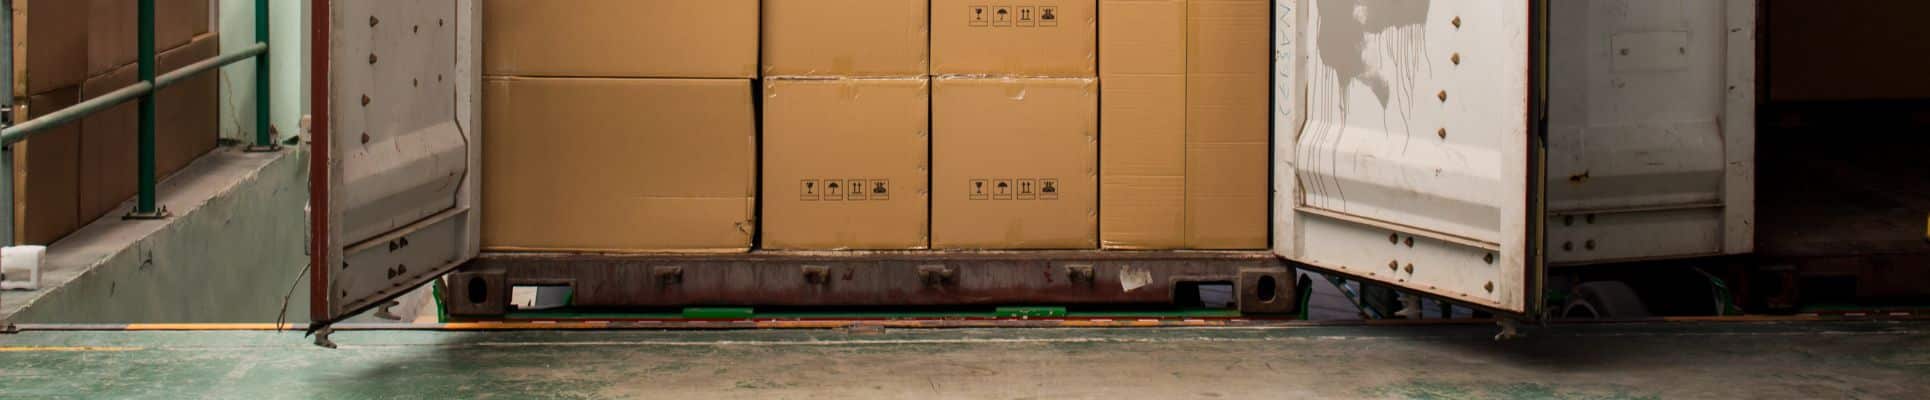 Warehouse Safety Tips for Unloading Cargo